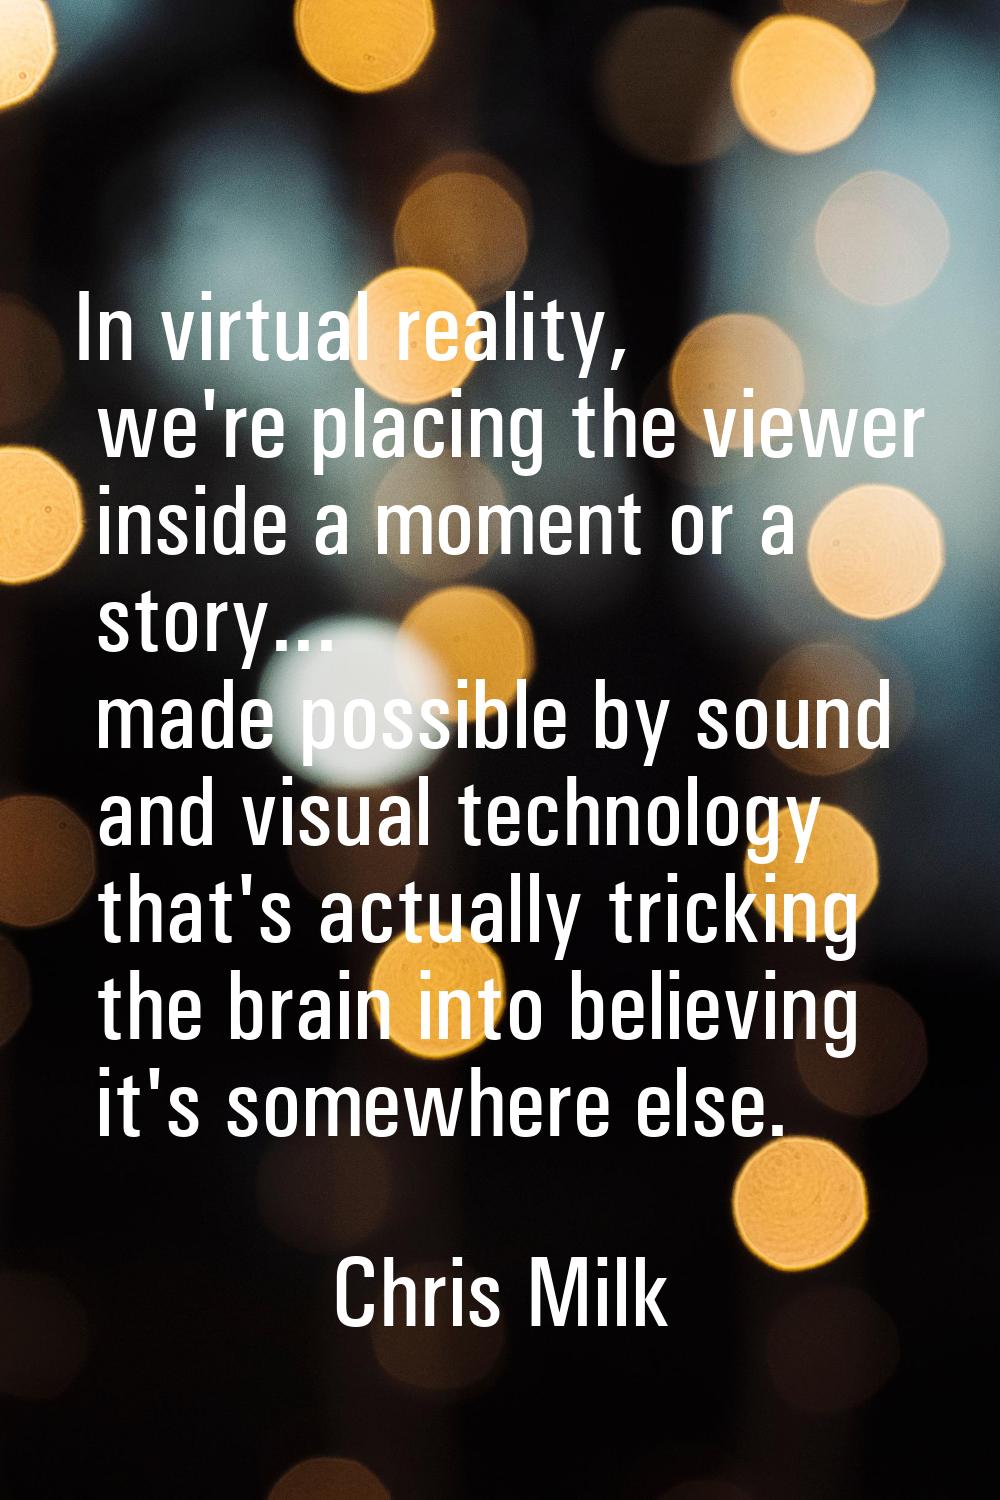 In virtual reality, we're placing the viewer inside a moment or a story... made possible by sound a